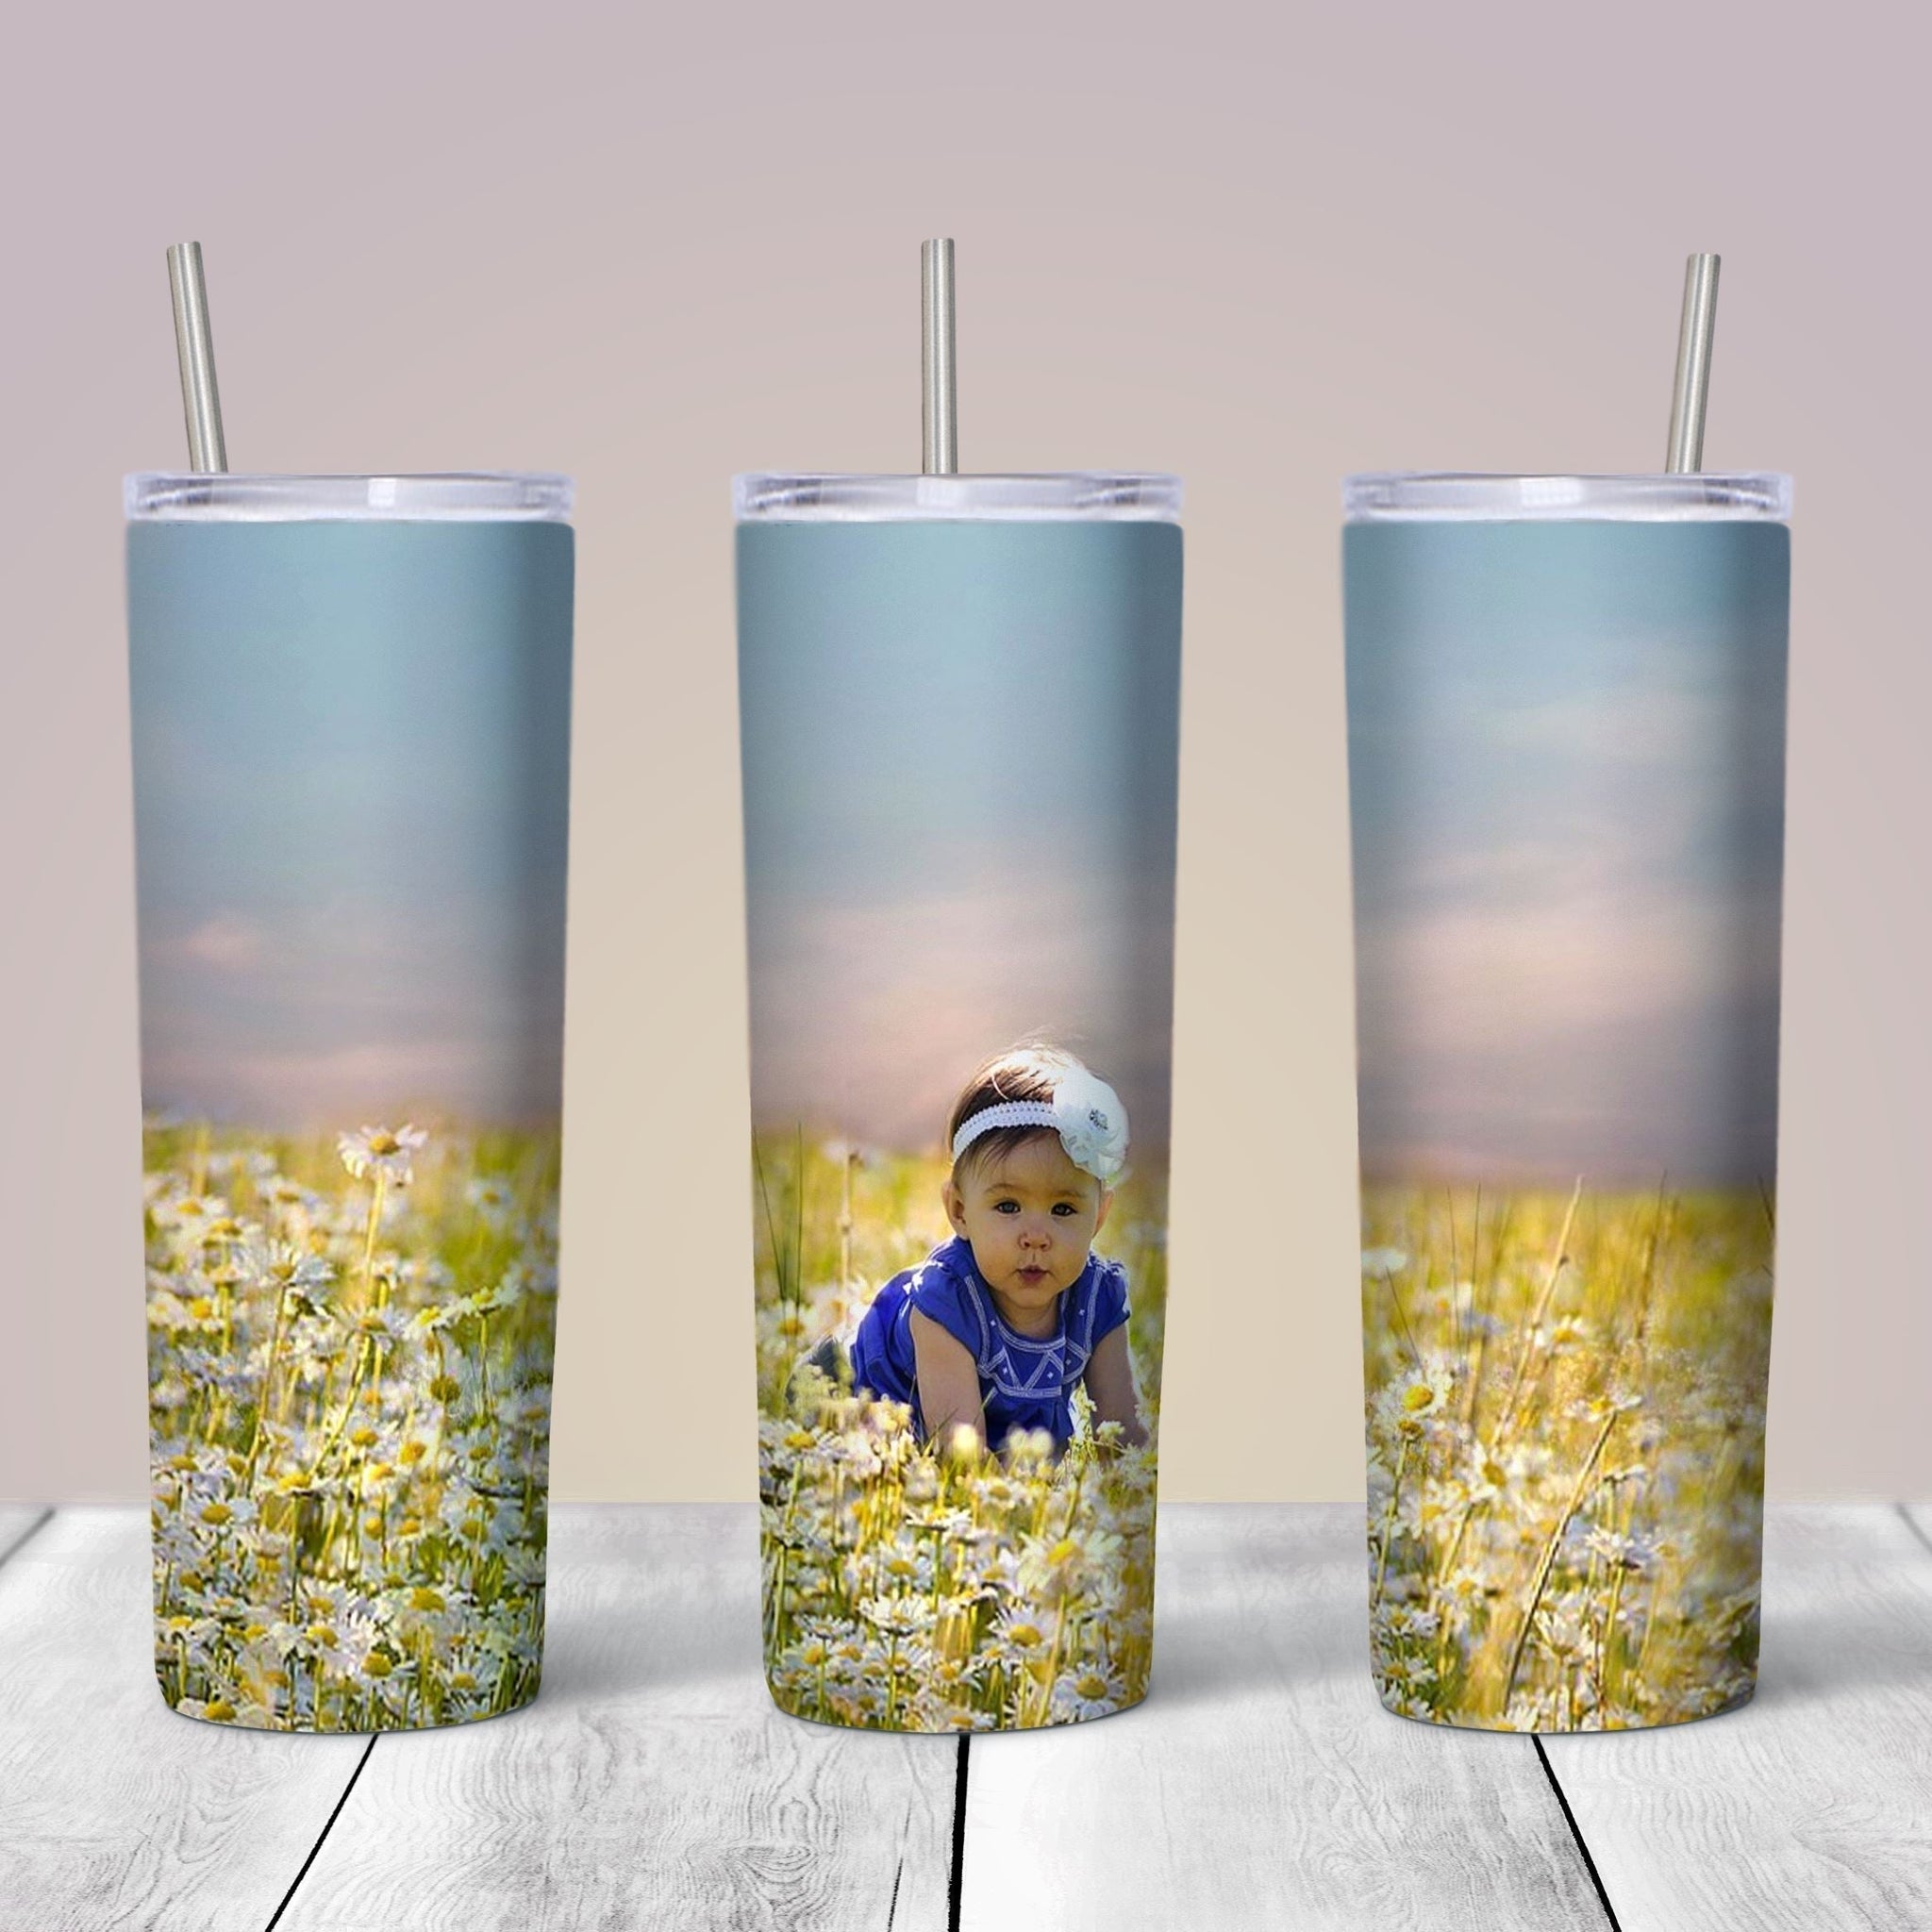 How to Sublimate Tumblers with the Cricut Mug Press - Michelle's